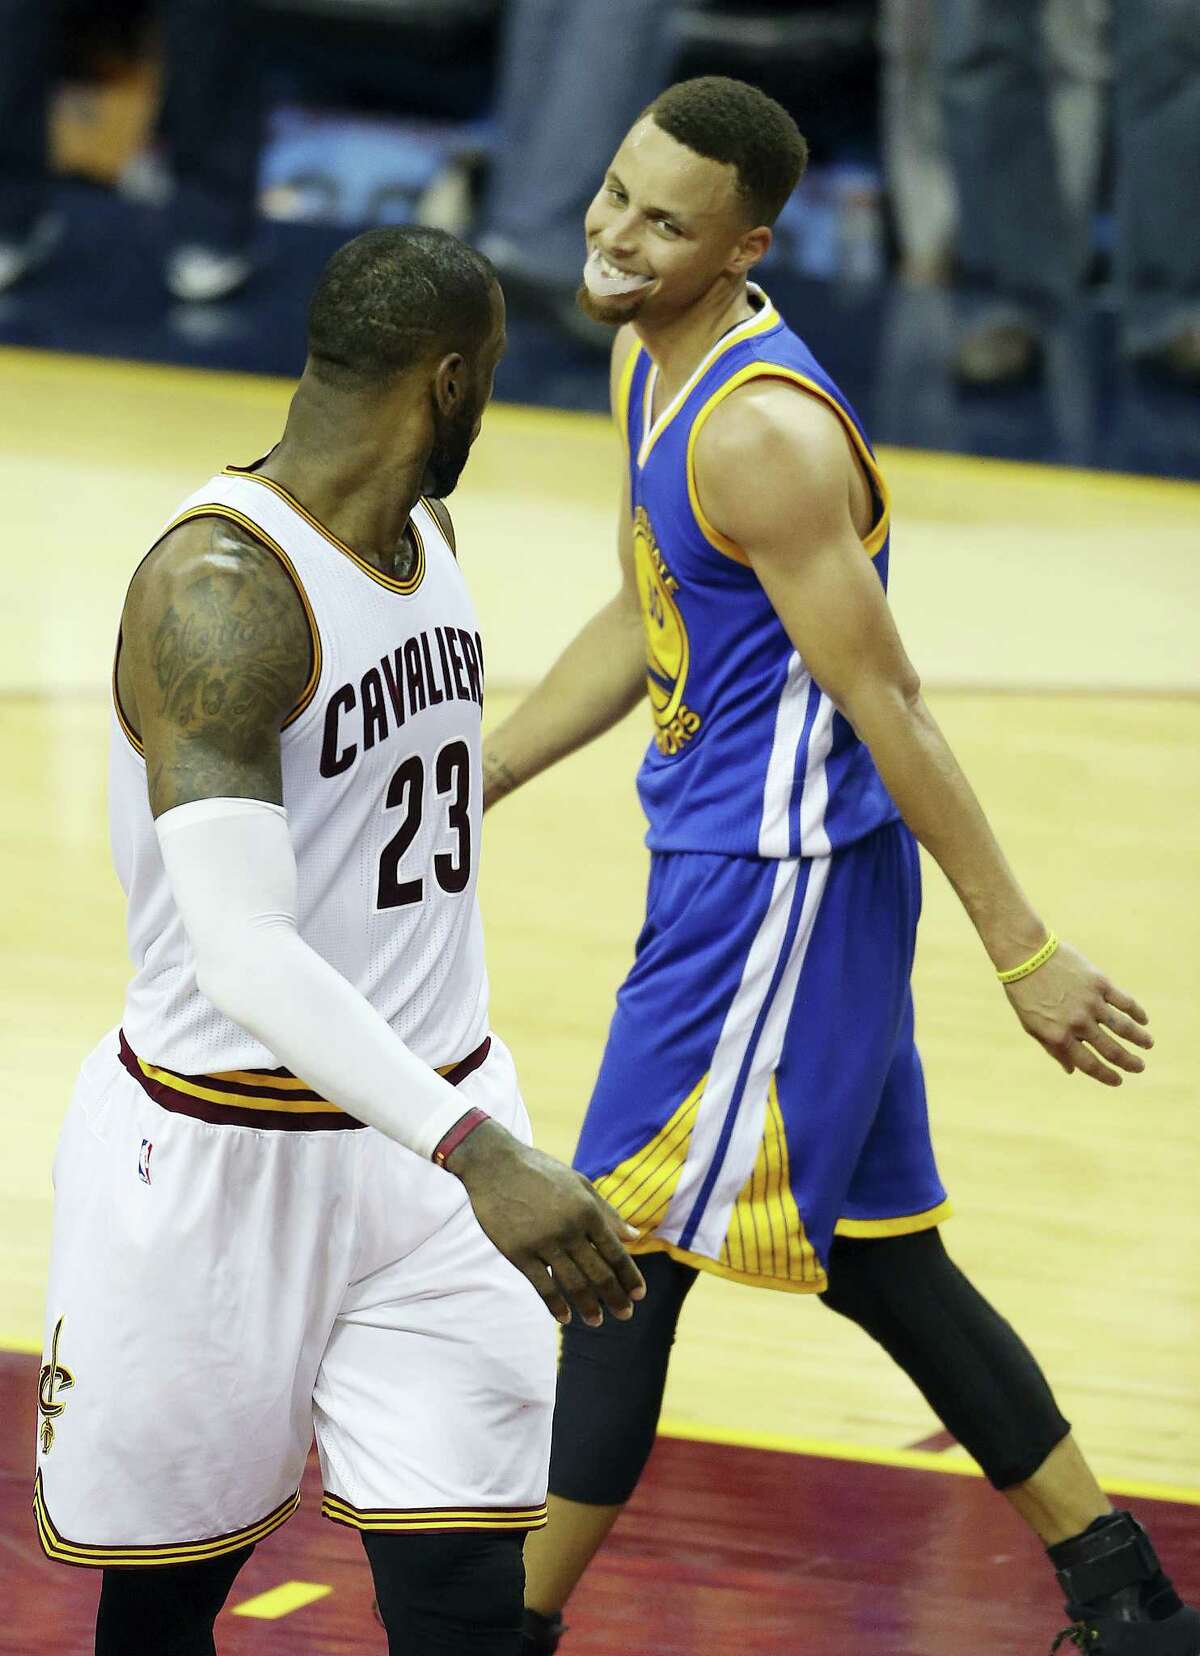 Series Preview: LeBron James, Stephen Curry back at it in surprise showdown